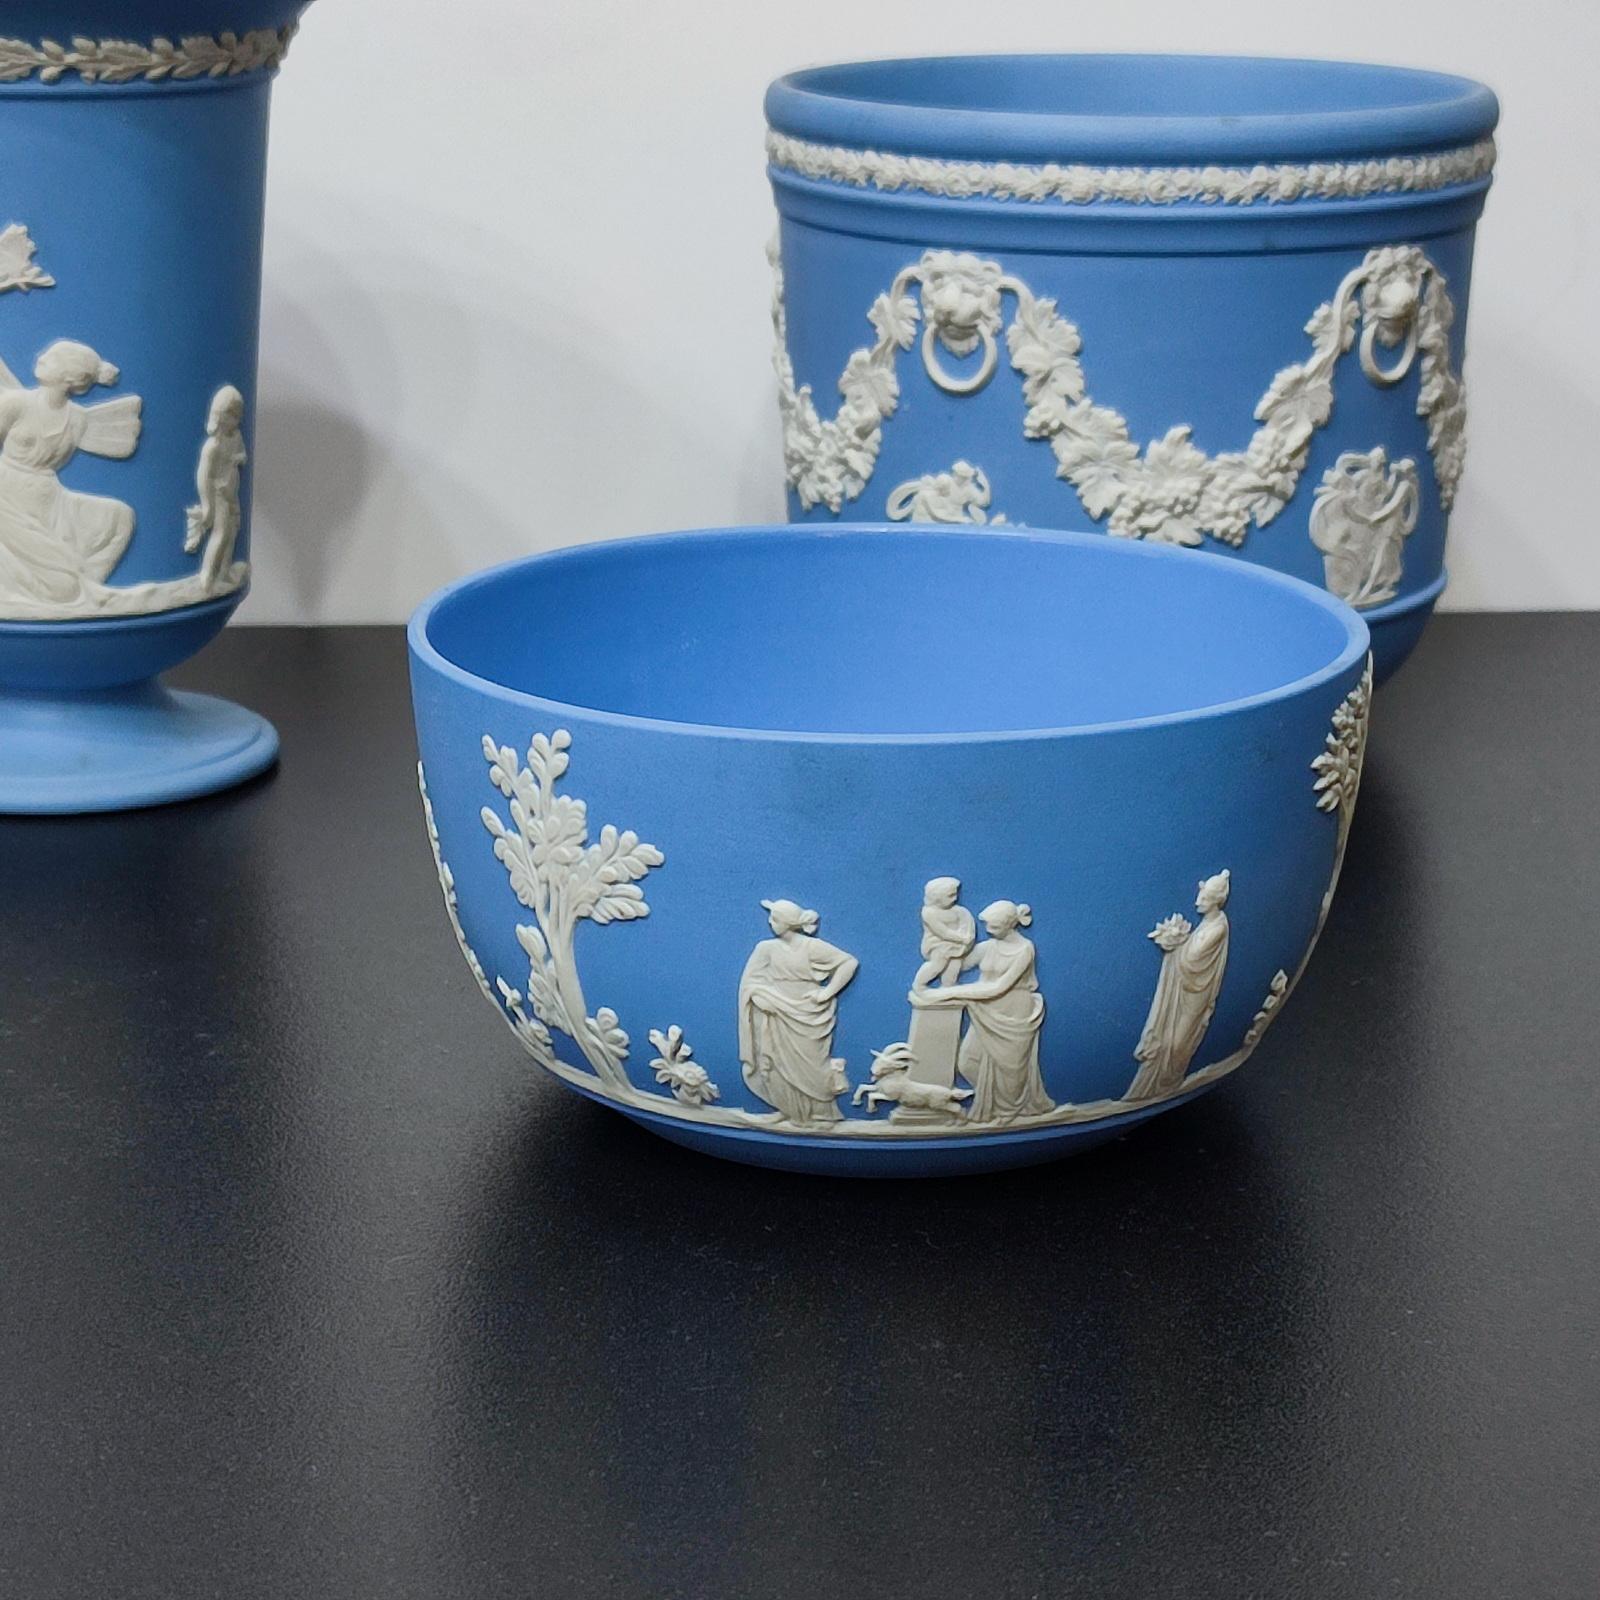 Wedgwood Blue Jasper Ware Vessels Classical Scenes, Collection of 3, FREESHIP For Sale 4